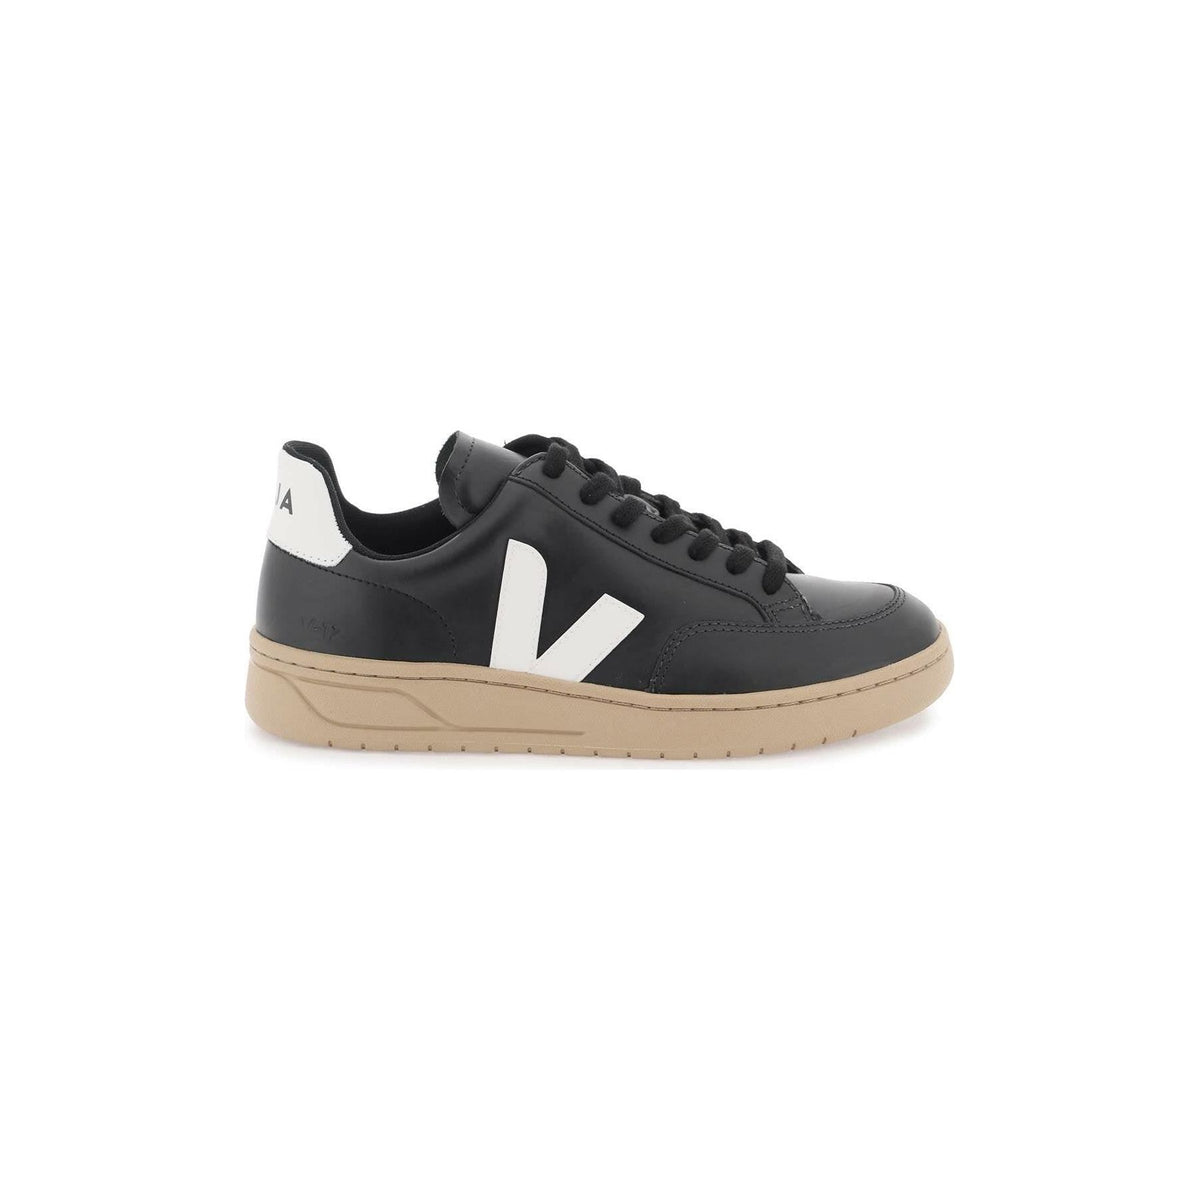 Black Smooth Leather V-12 Sneakers